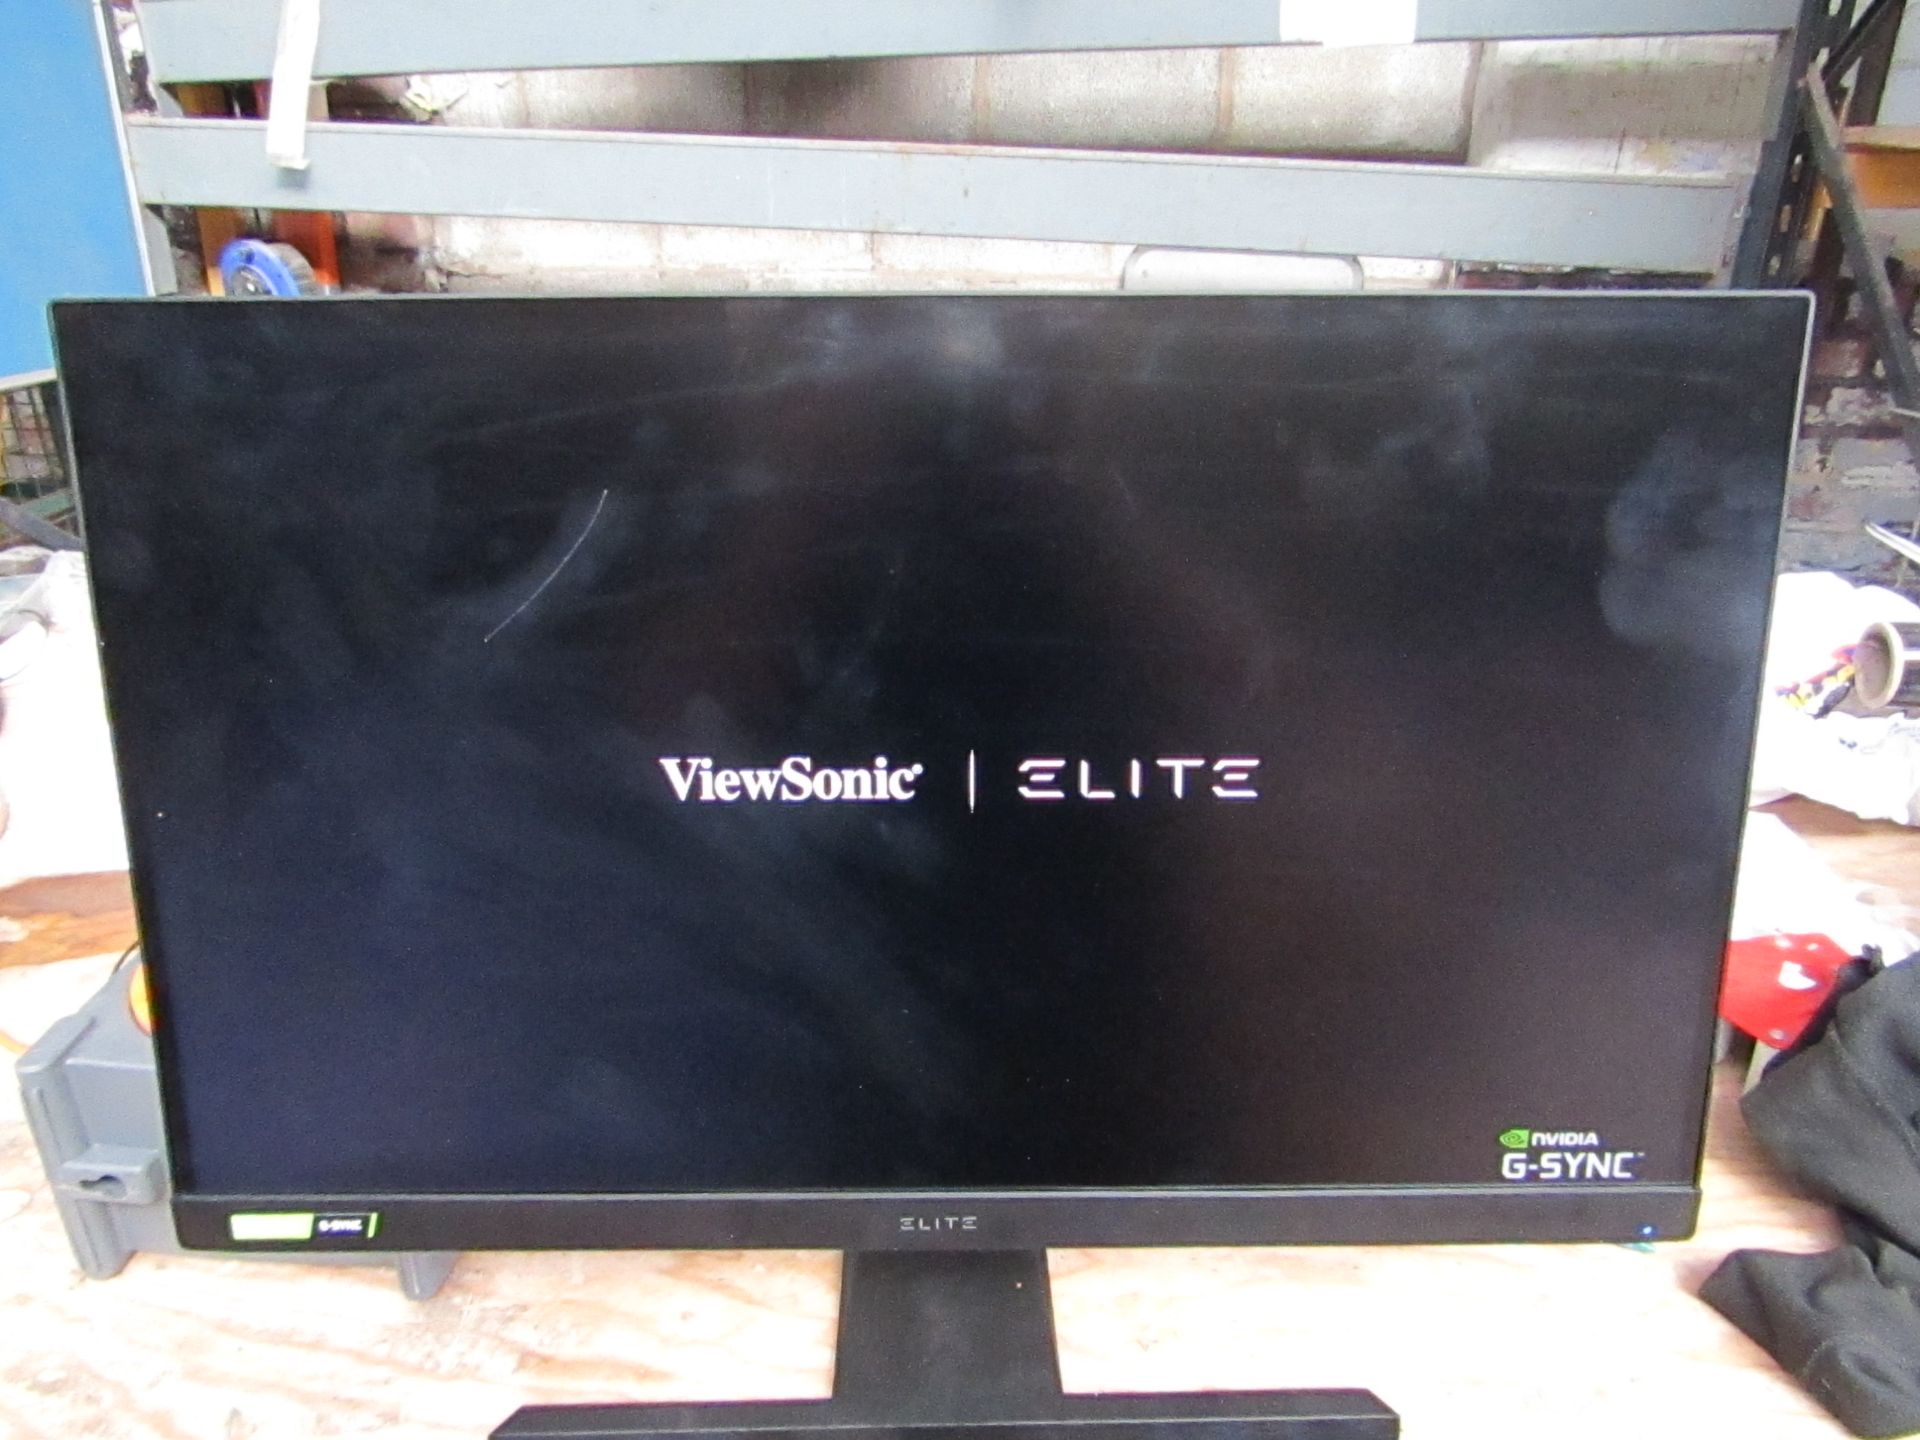 View sonic Elitre XG270QG 27" 1ms IPS Nano Colour Gaming Monitor, powers on and displays a picture